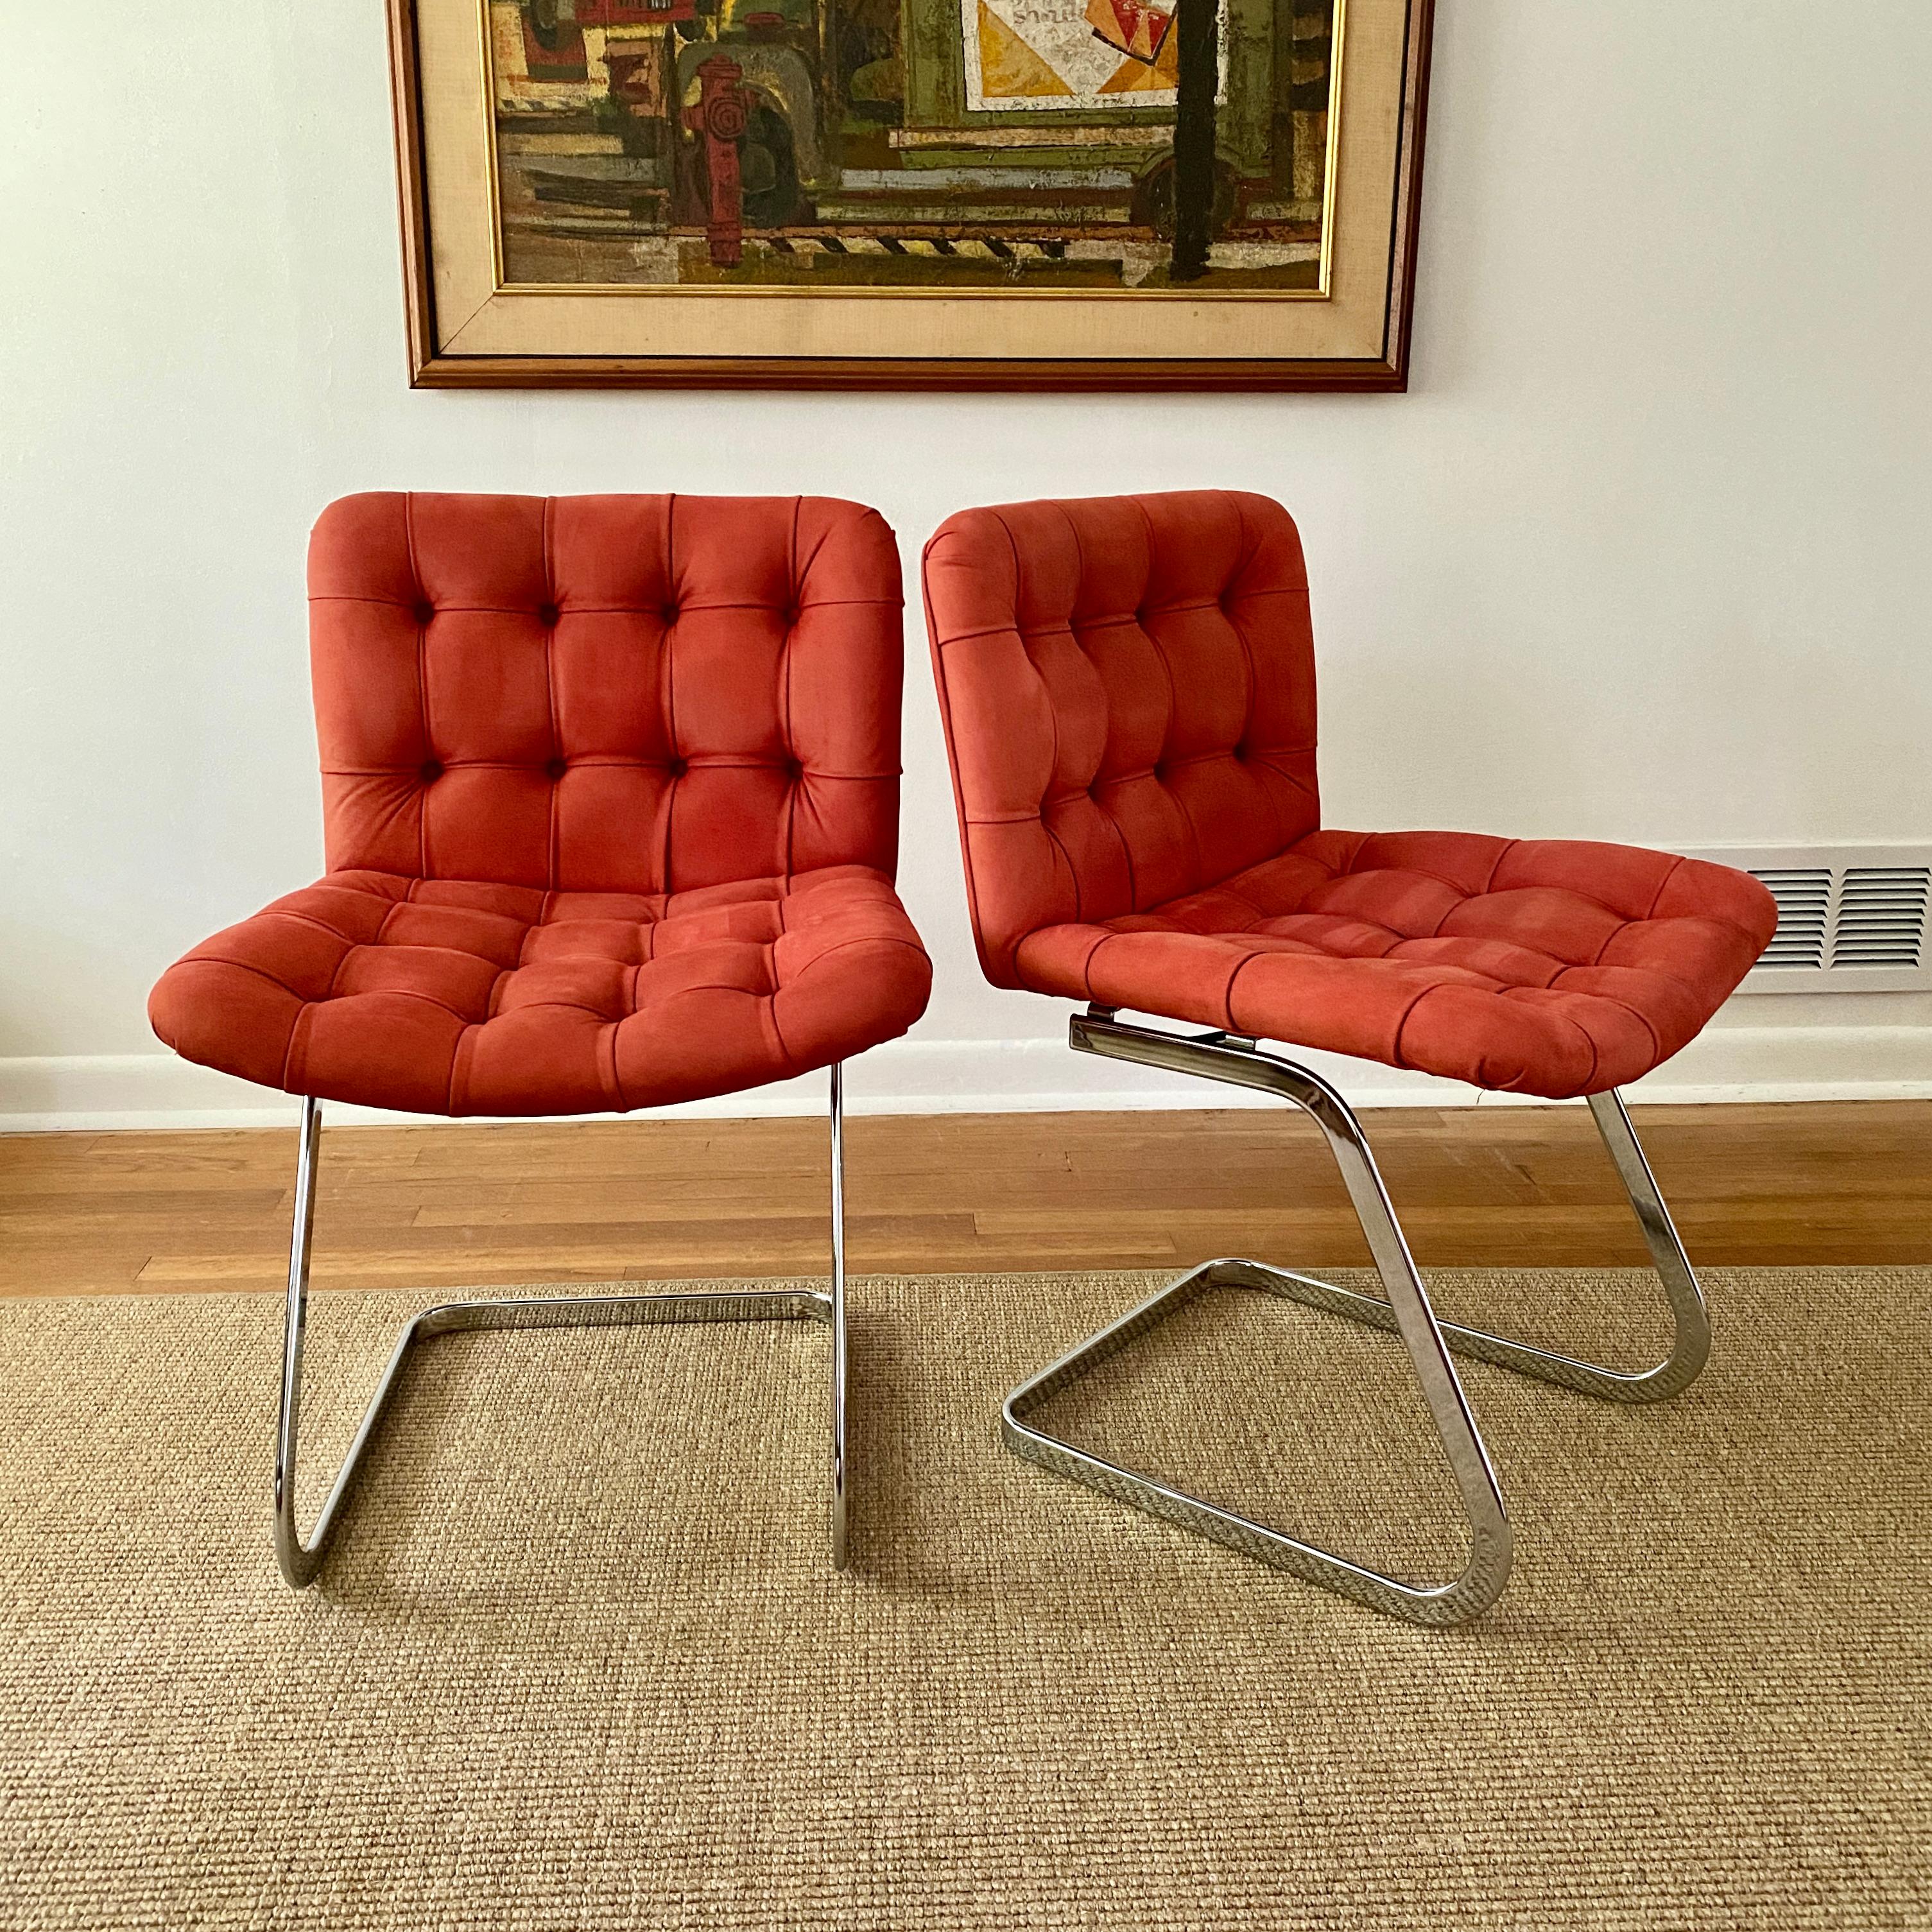 A beautiful pair of vintage cantilevered chairs designed by Robert Haussmann for de Sede, the chairs were distributed by Stendig.  The model number for the chairs is RH - 304 and they were produced between 1955 - 1960.  The legs of the chairs are